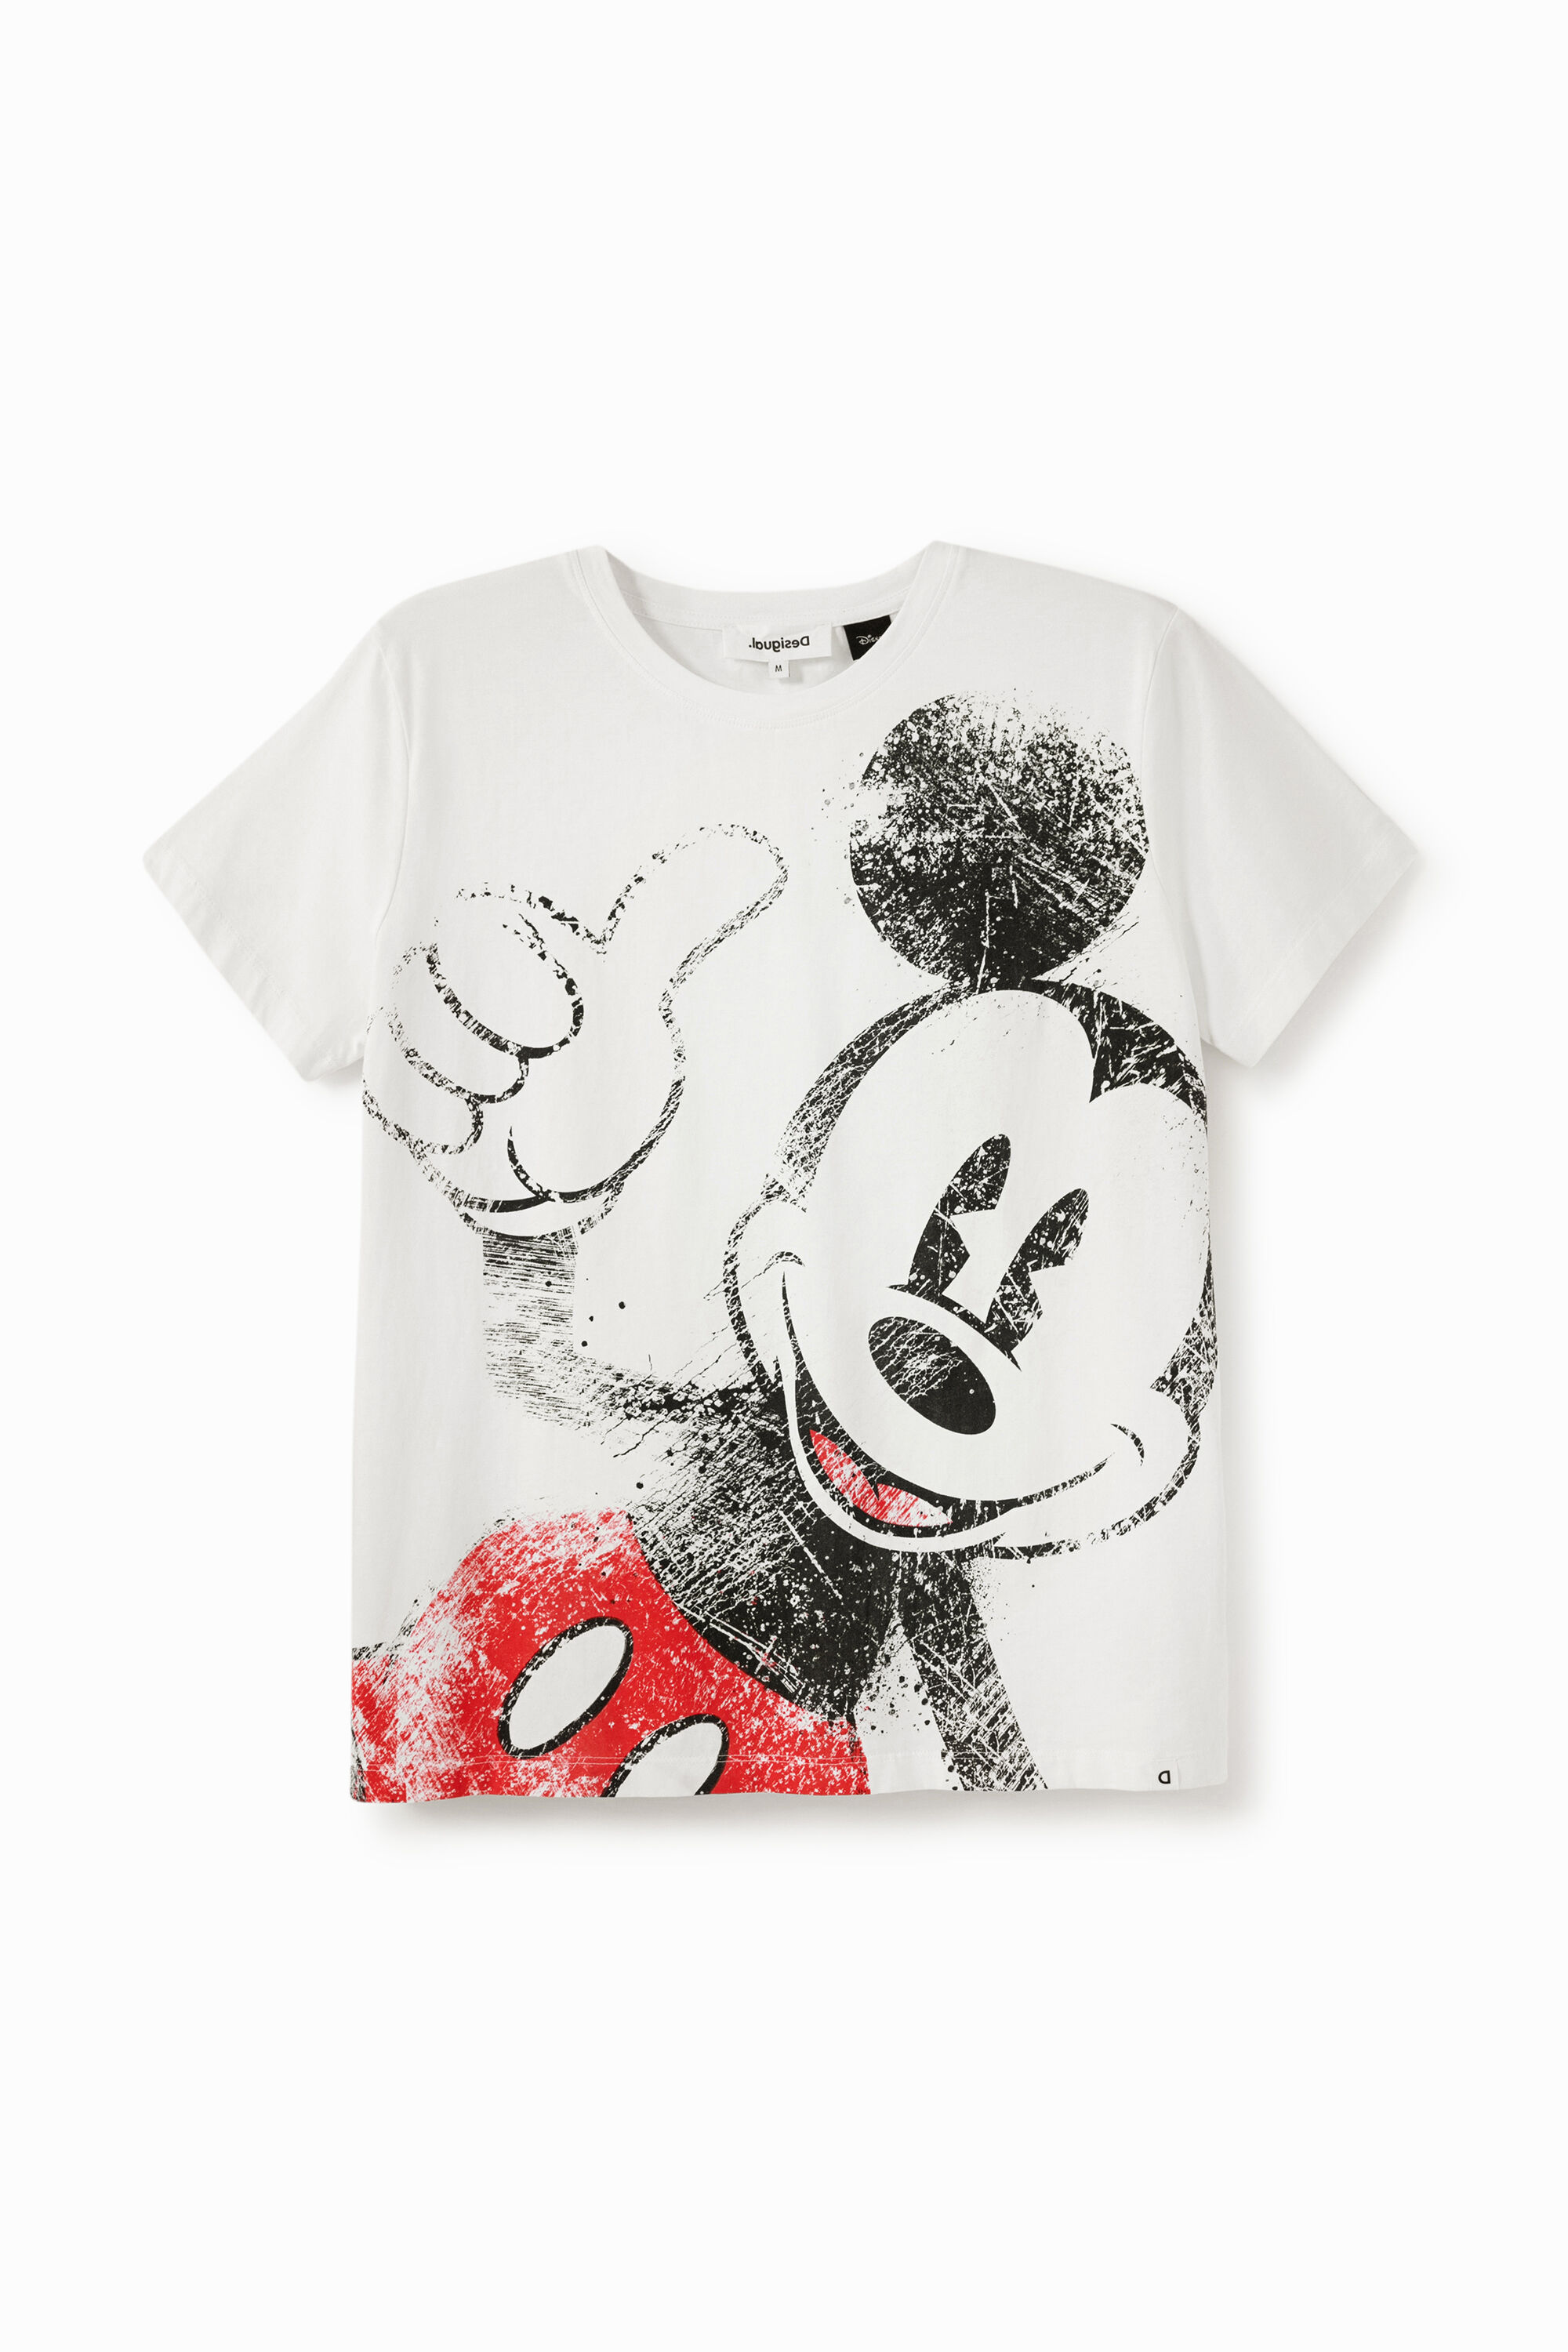 ladies mickey mouse t shirt